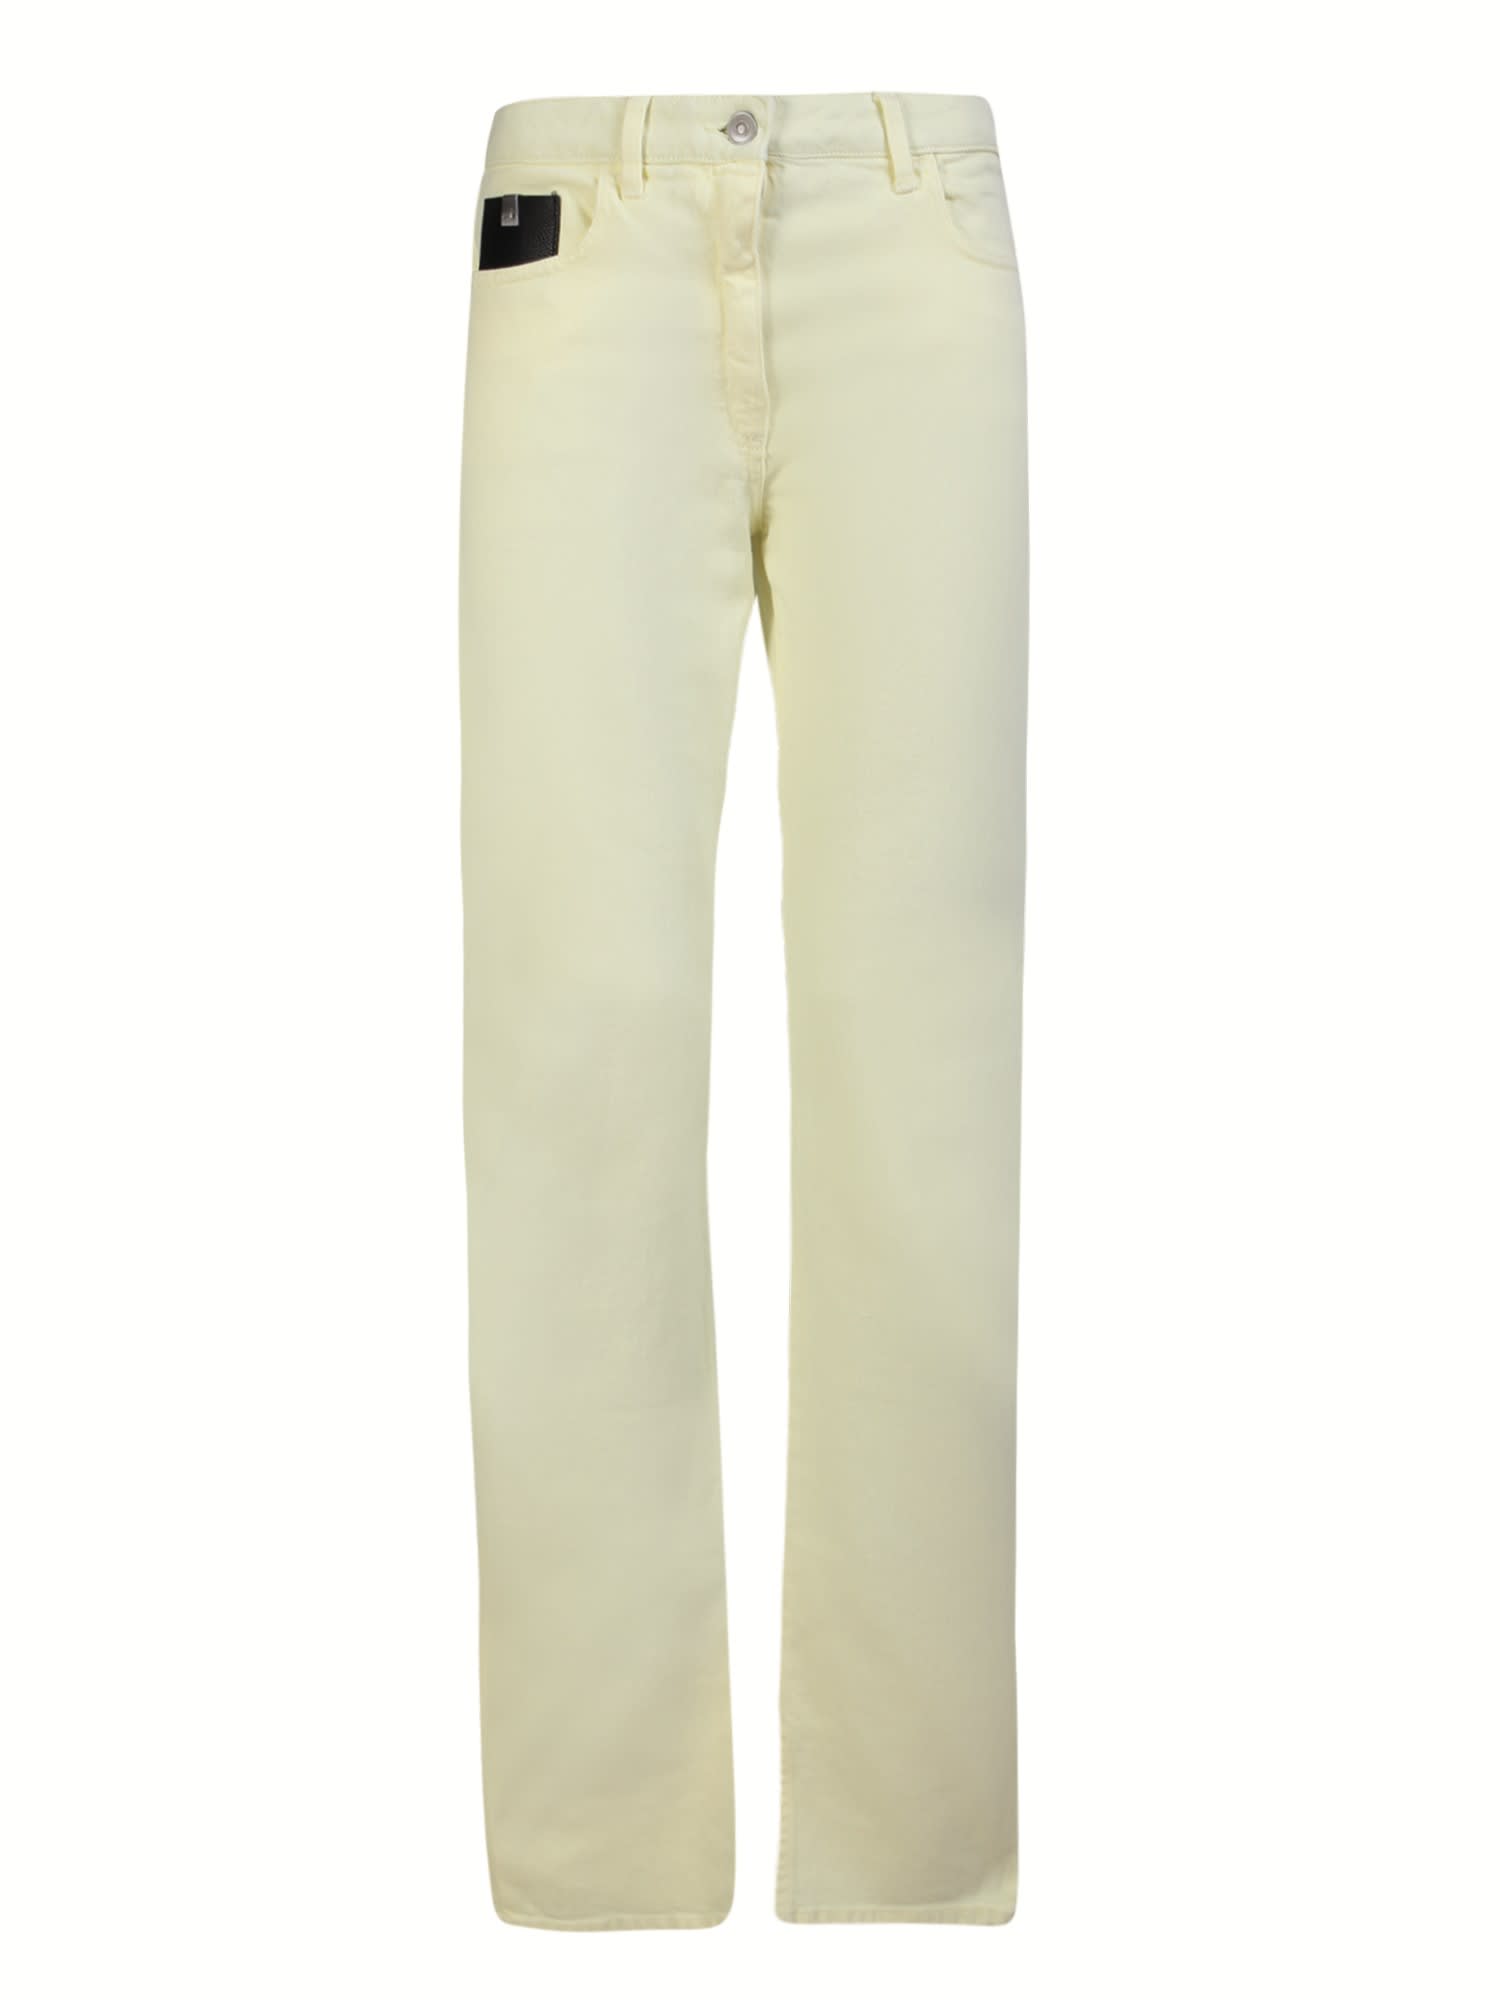 1017 ALYX 9SM High-waisted Skinny Jeans Light Yellow